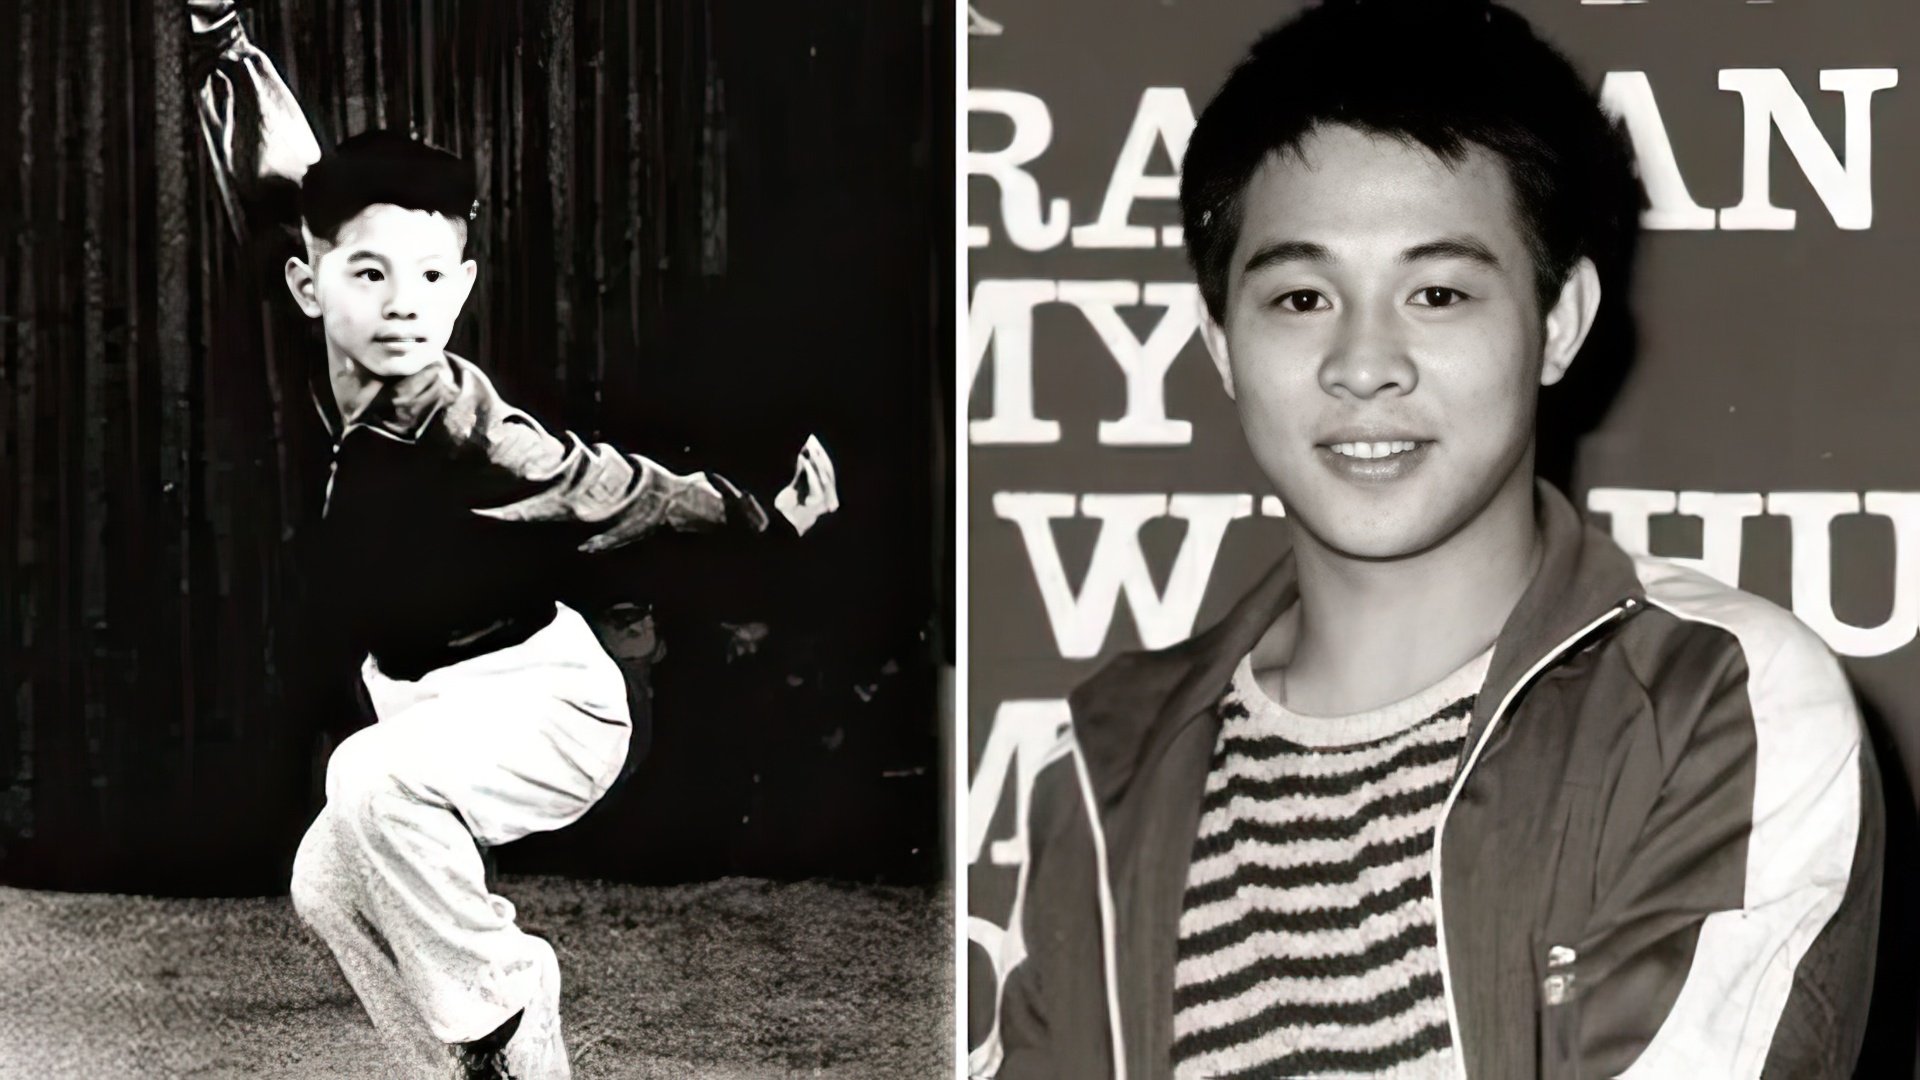 Jet Li in childhood and young ages